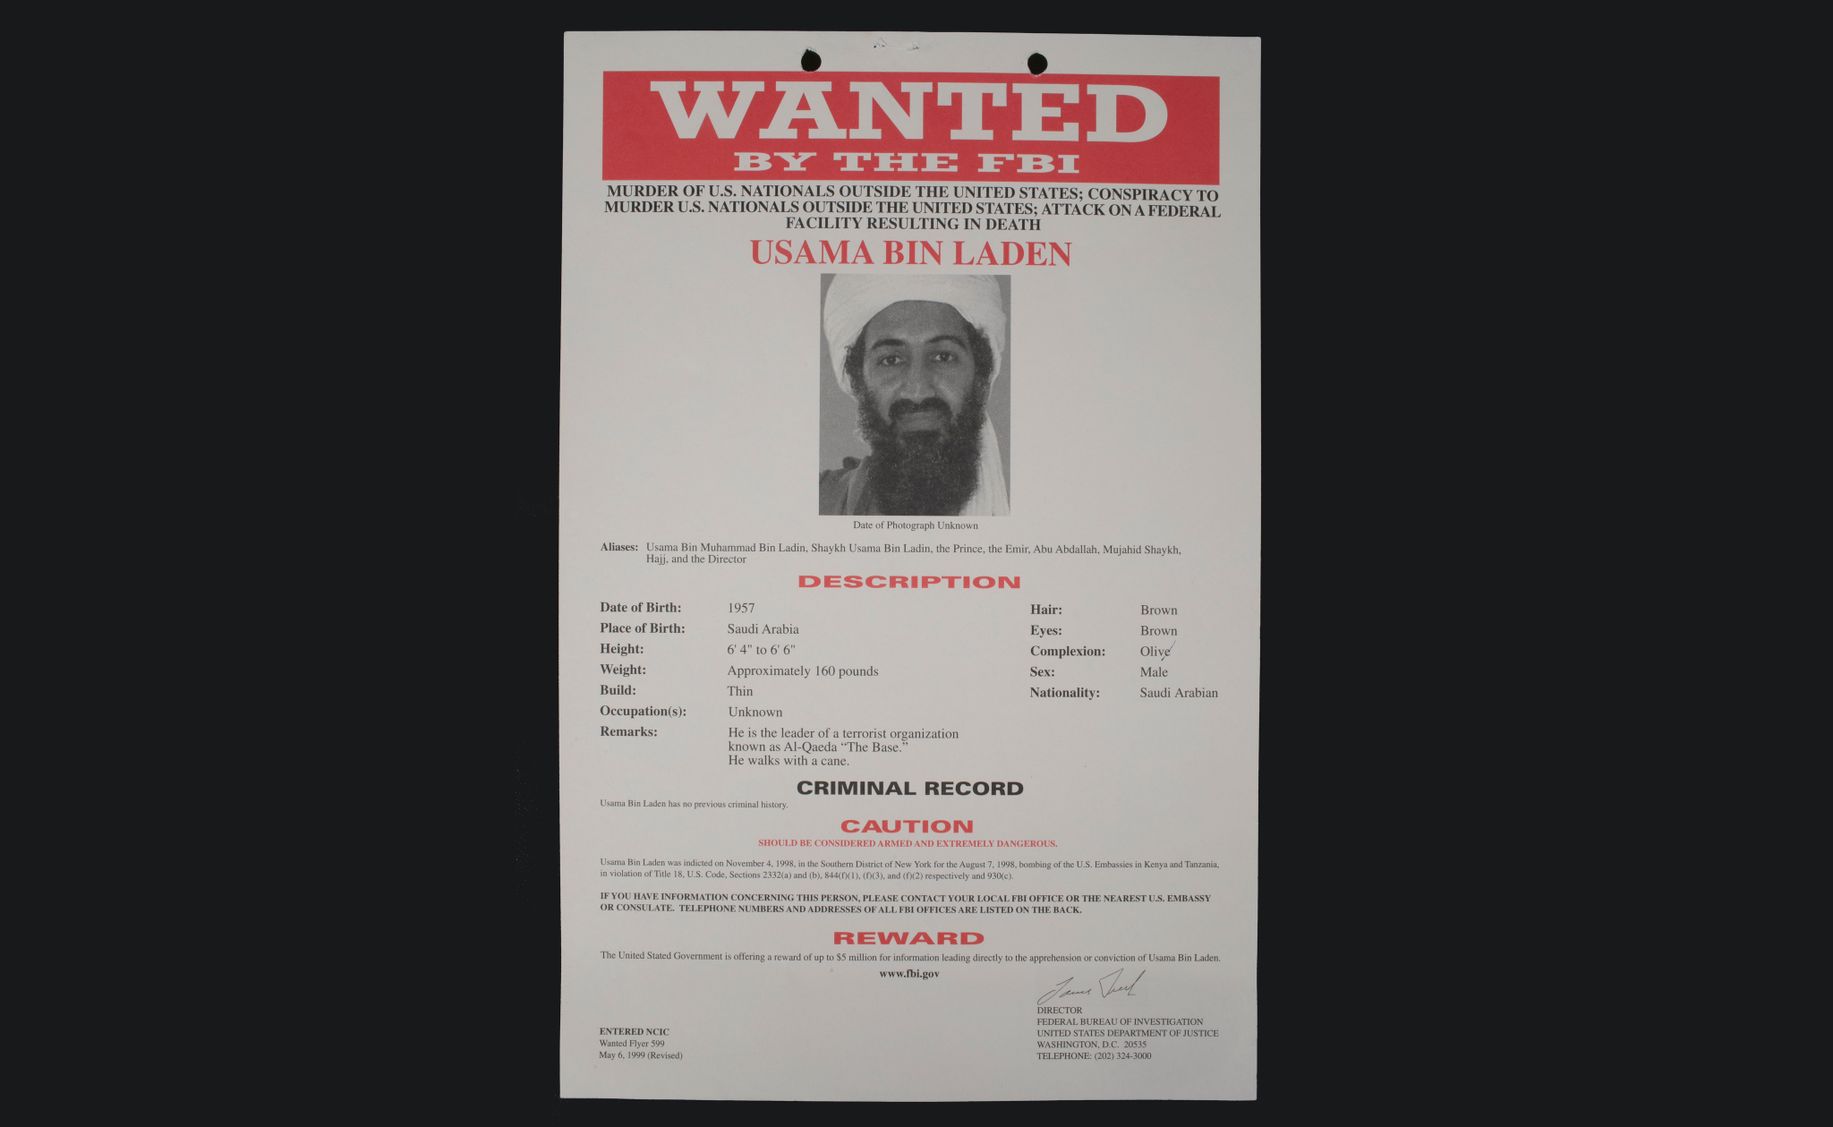 FBI wanted poster for Osama bin Laden. It includes a black and white photo of bin Laden and his physical description.